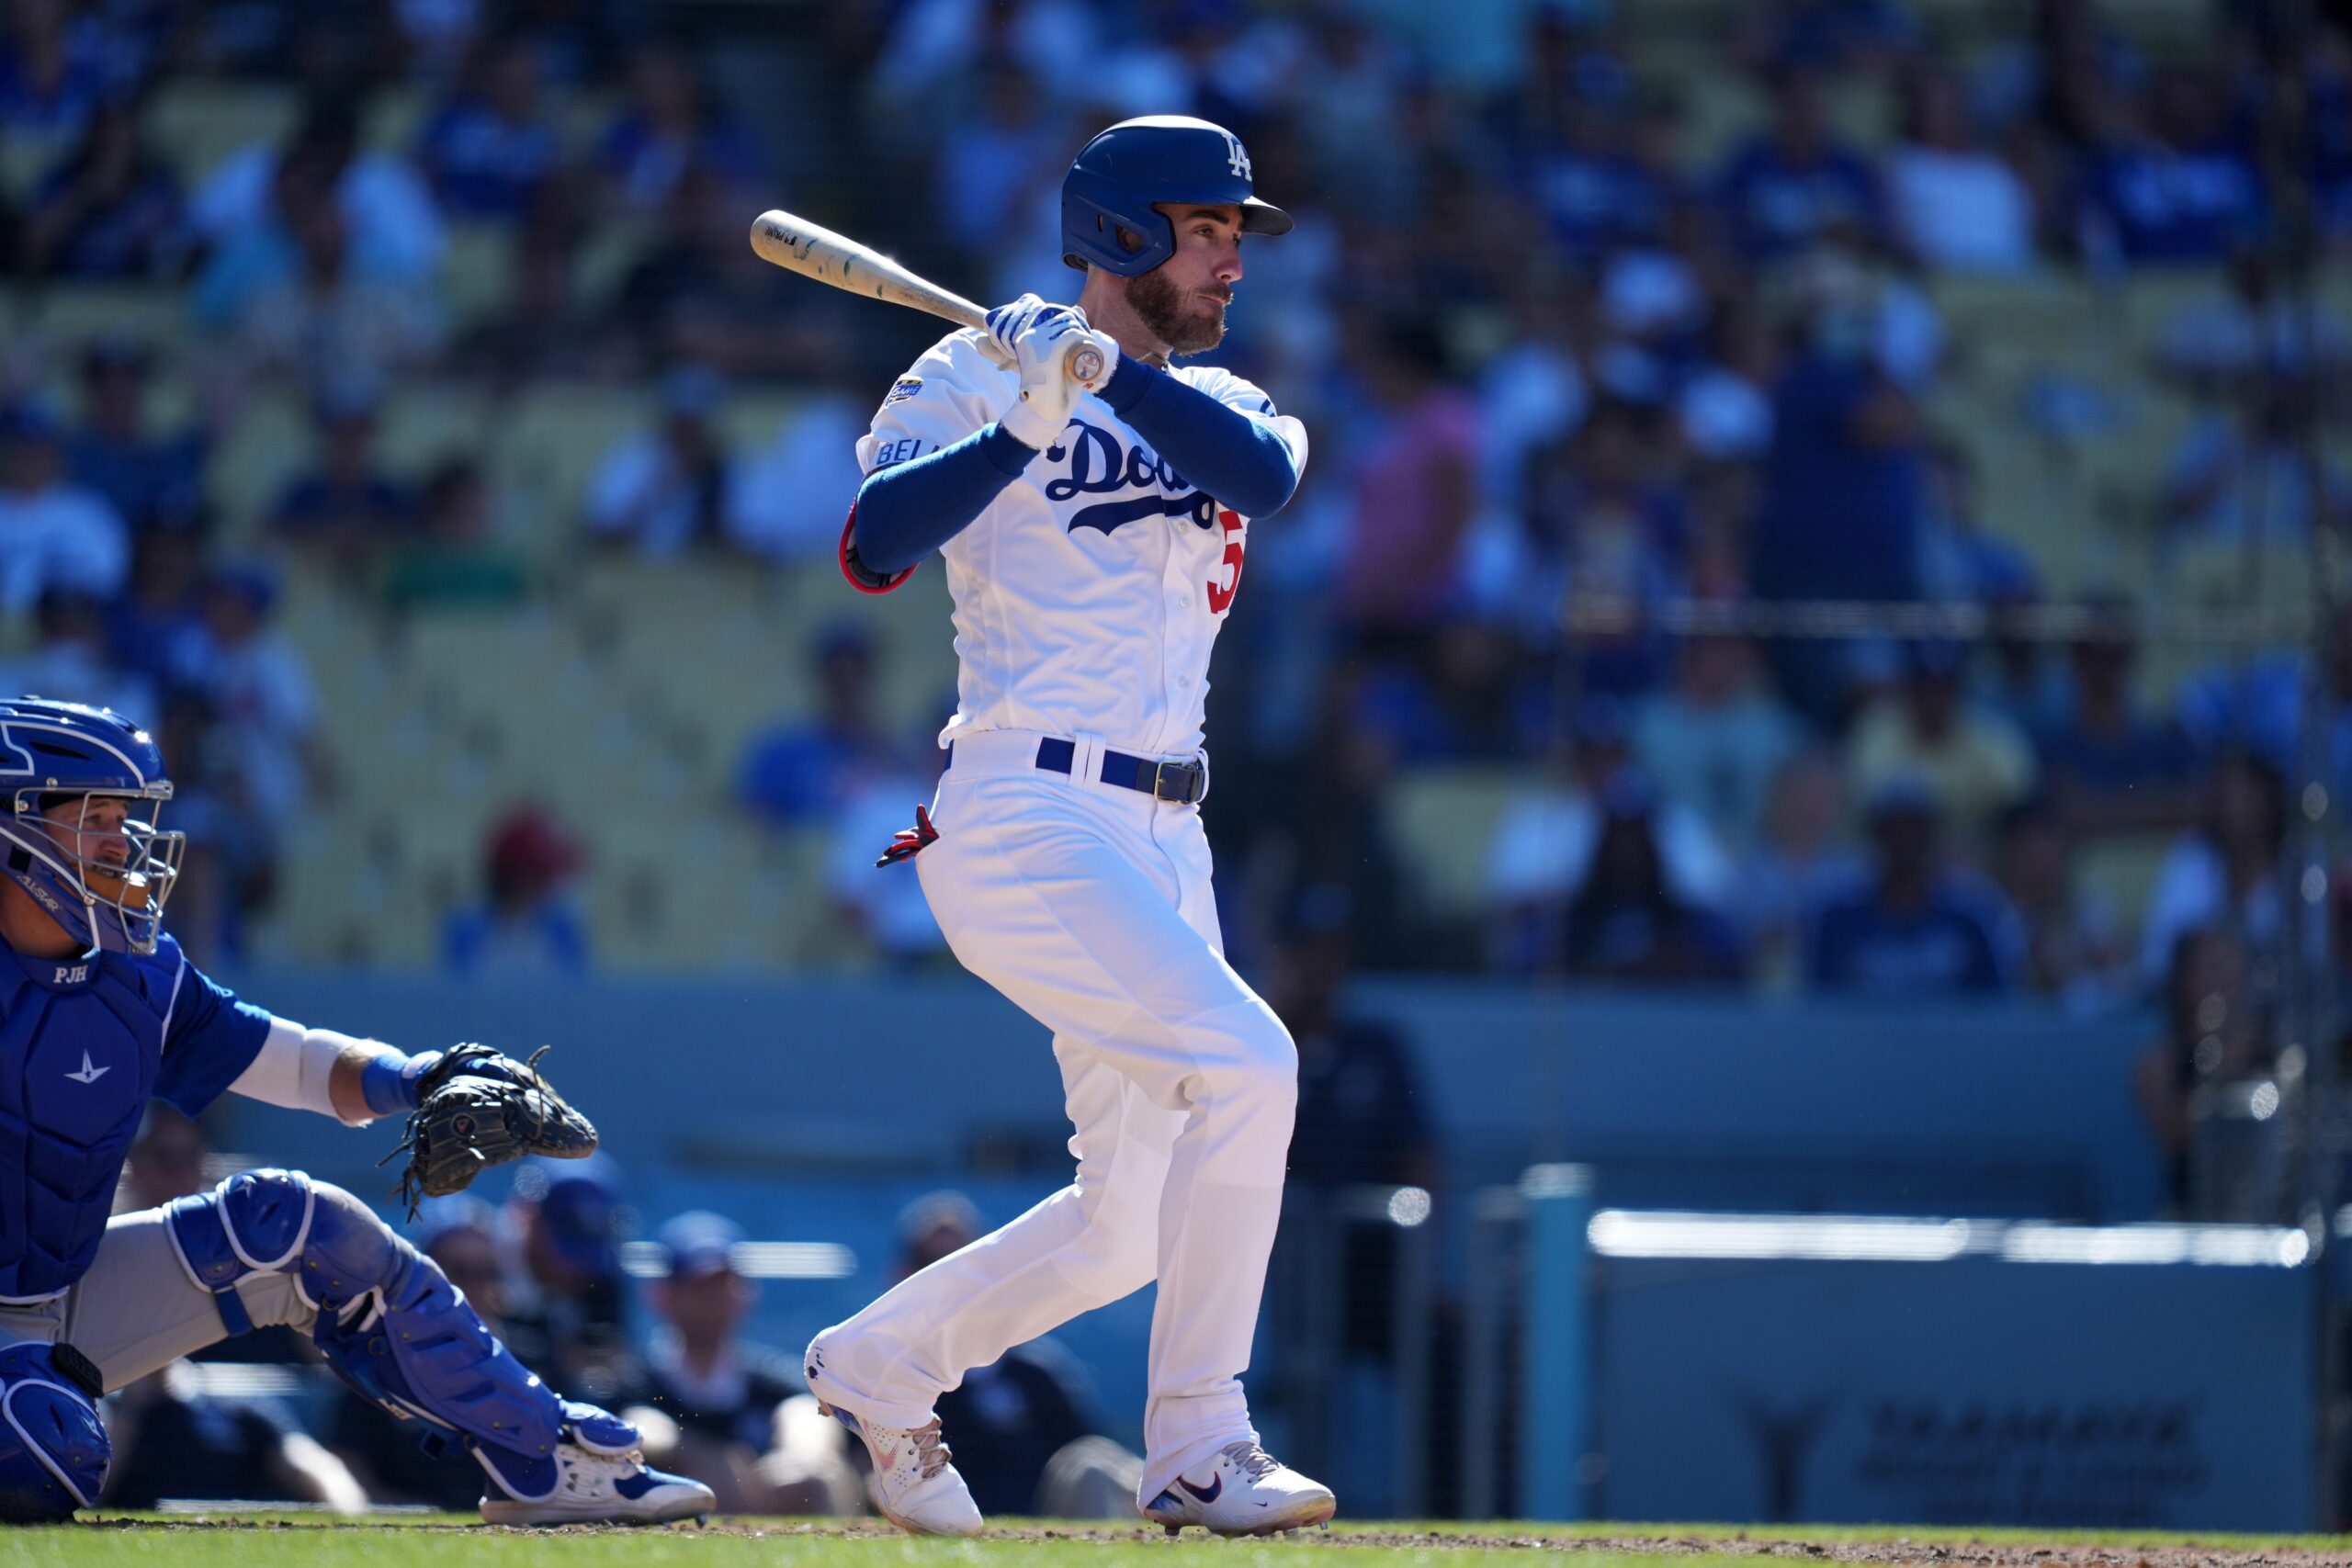 Dodgers dominating since Cody Bellinger's arrival to the bigs